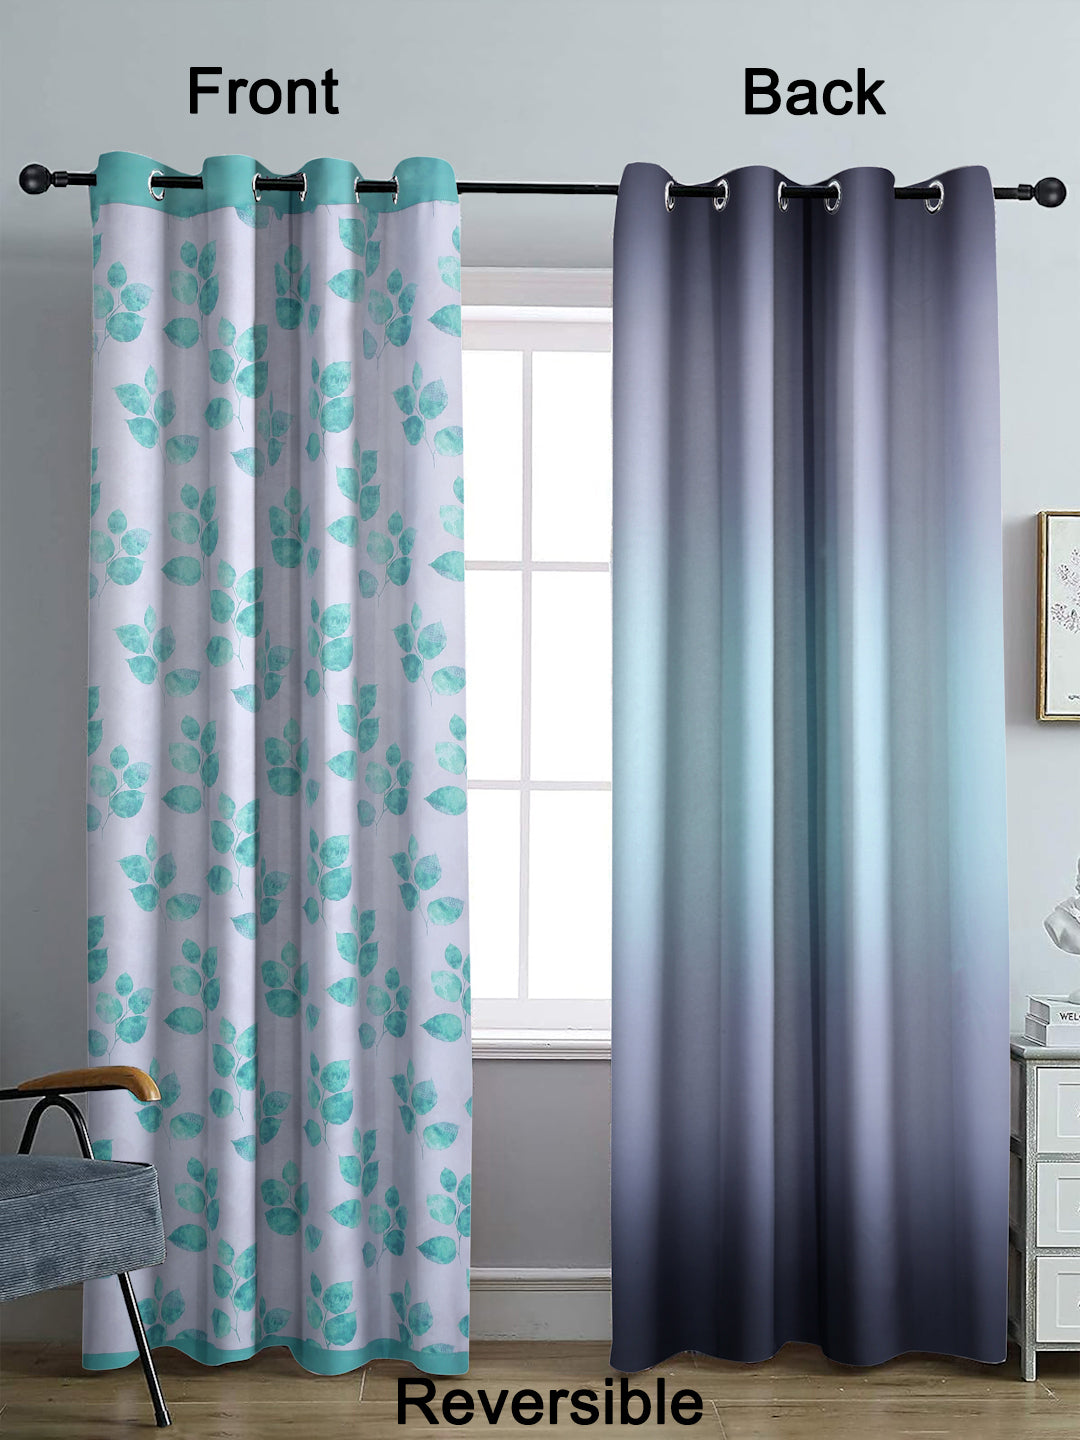 Reversible Floral Printed Blackout Long Door Curtains Set of 2- Turquoise